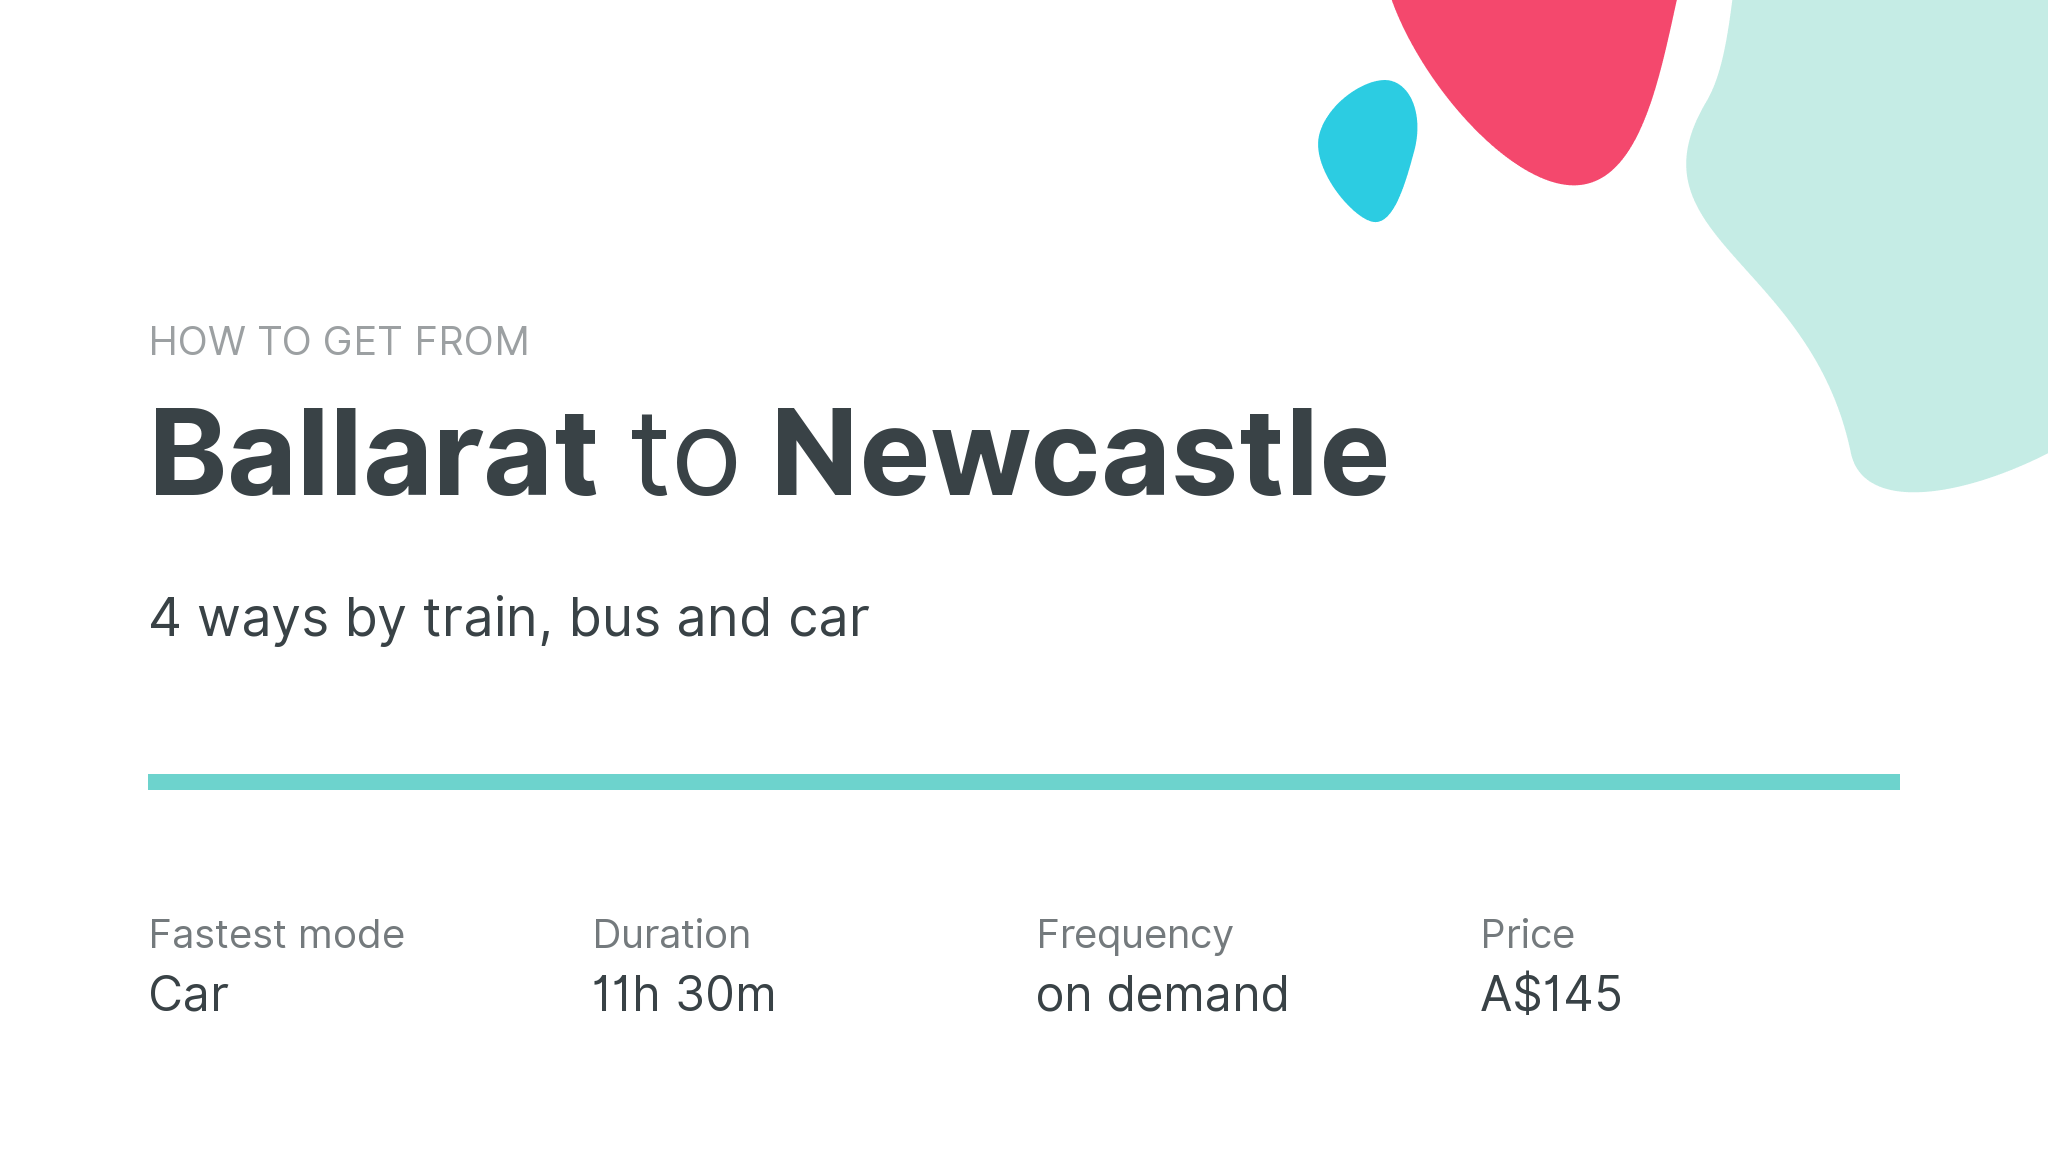 How do I get from Ballarat to Newcastle